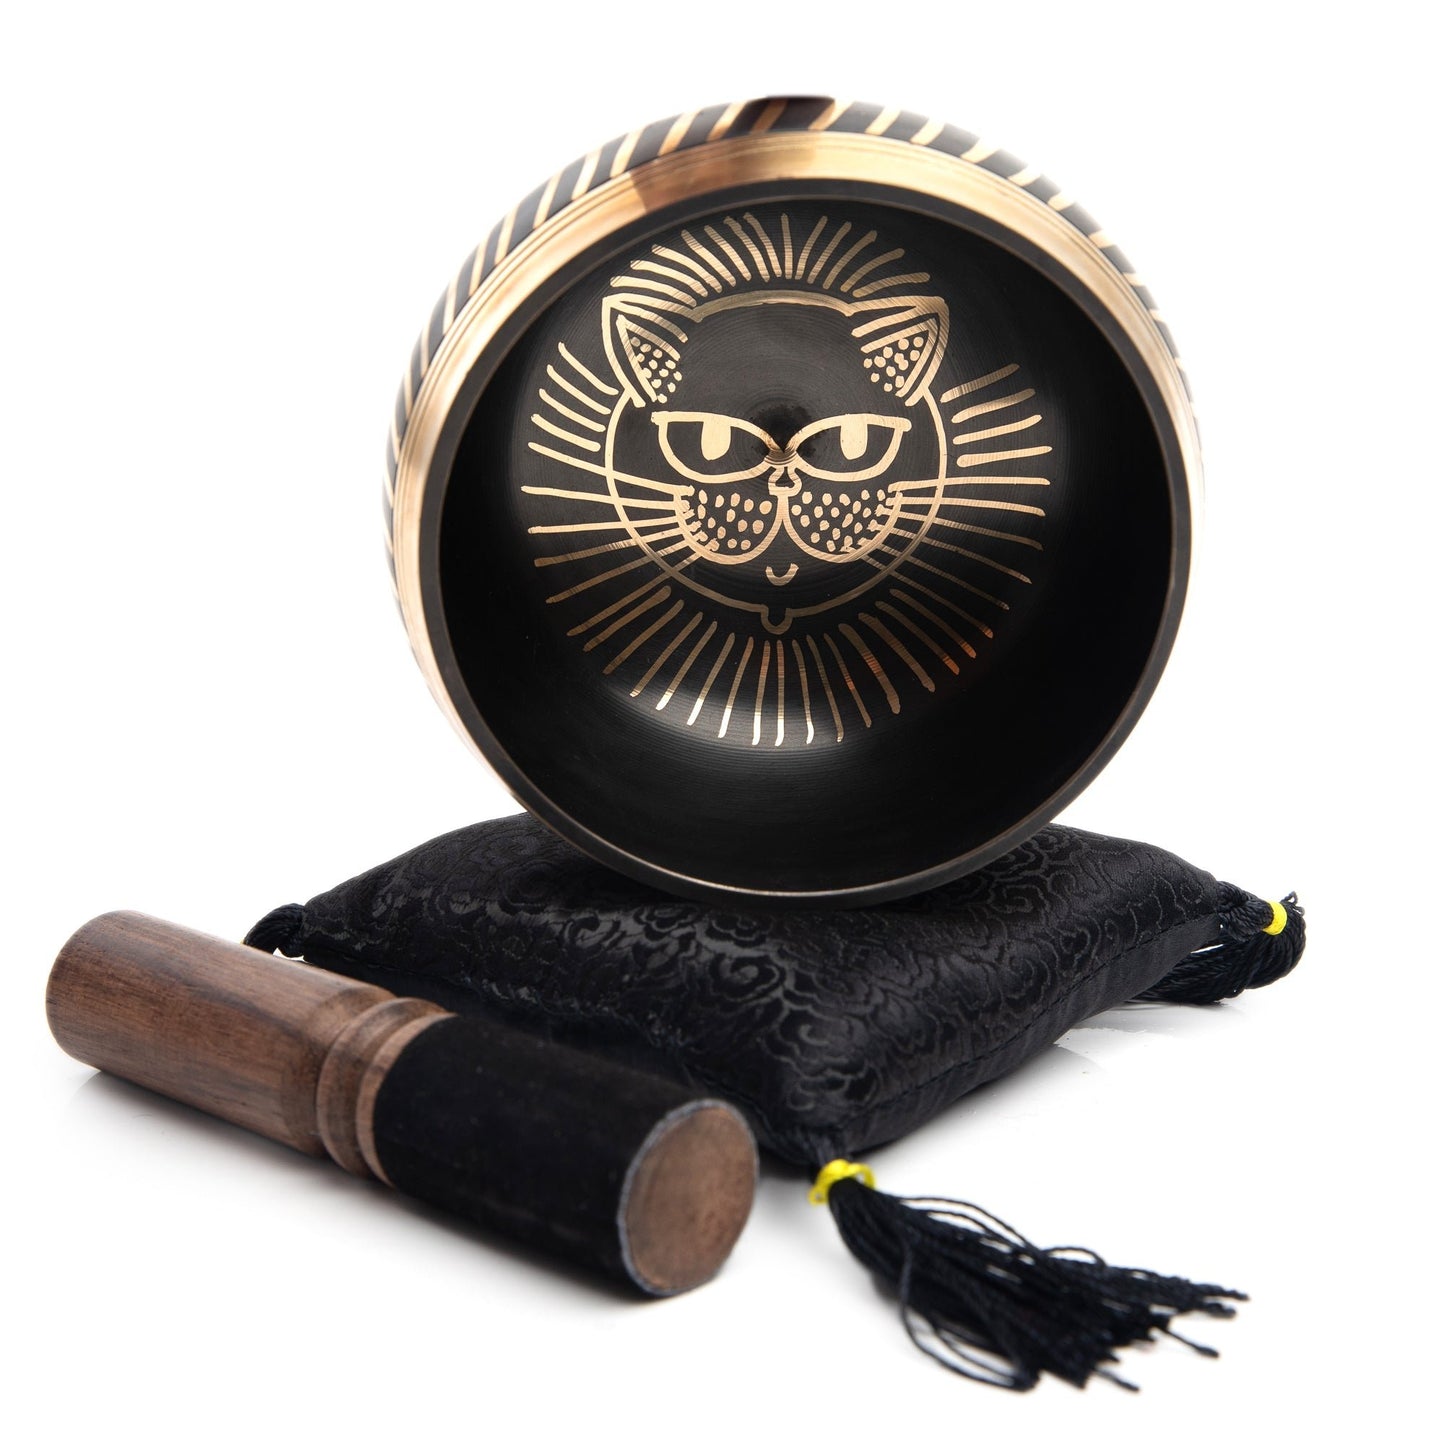 Tibetan Singing bowl Set - Easy To Play Cat Design Meditation Mindful 7 Chakra Sound Healing Handcrated Gift By HIMALAYAN BAZAAR